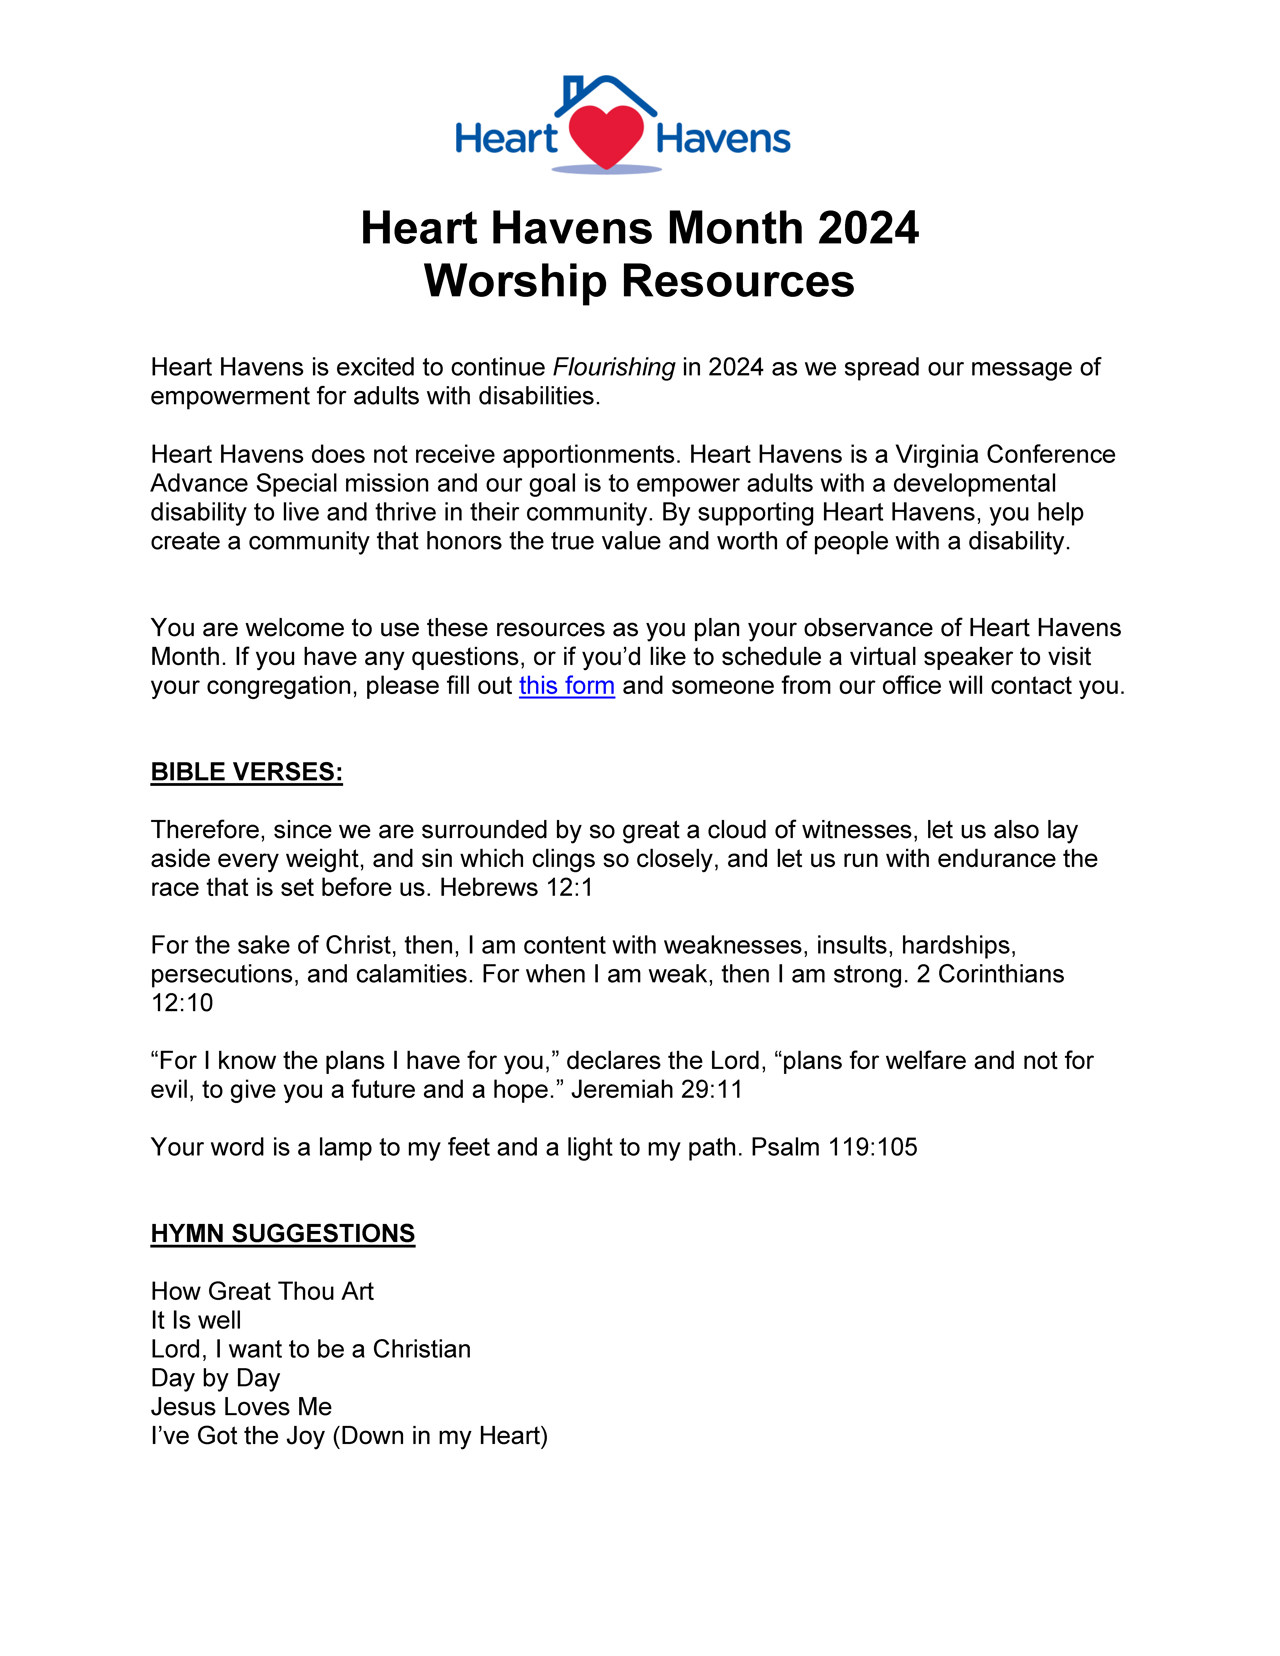 Heart Havens Month 2024 Worship Resources Page 1